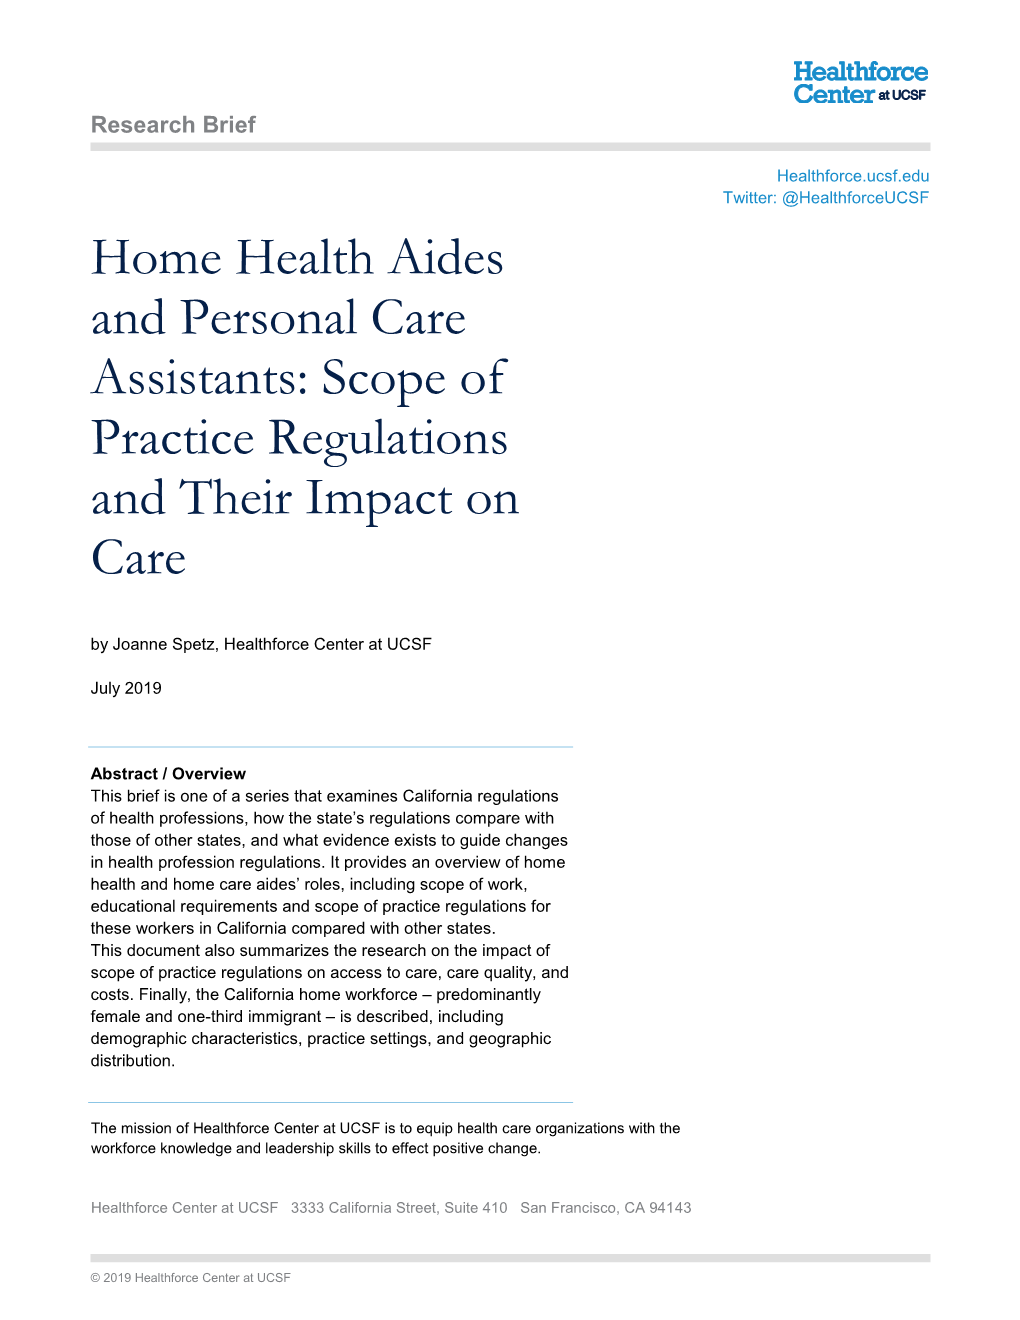 Home Health Aides and Personal Care Assistants: Scope of Practice Regulations and Their Impact on Care by Joanne Spetz, Healthforce Center at UCSF